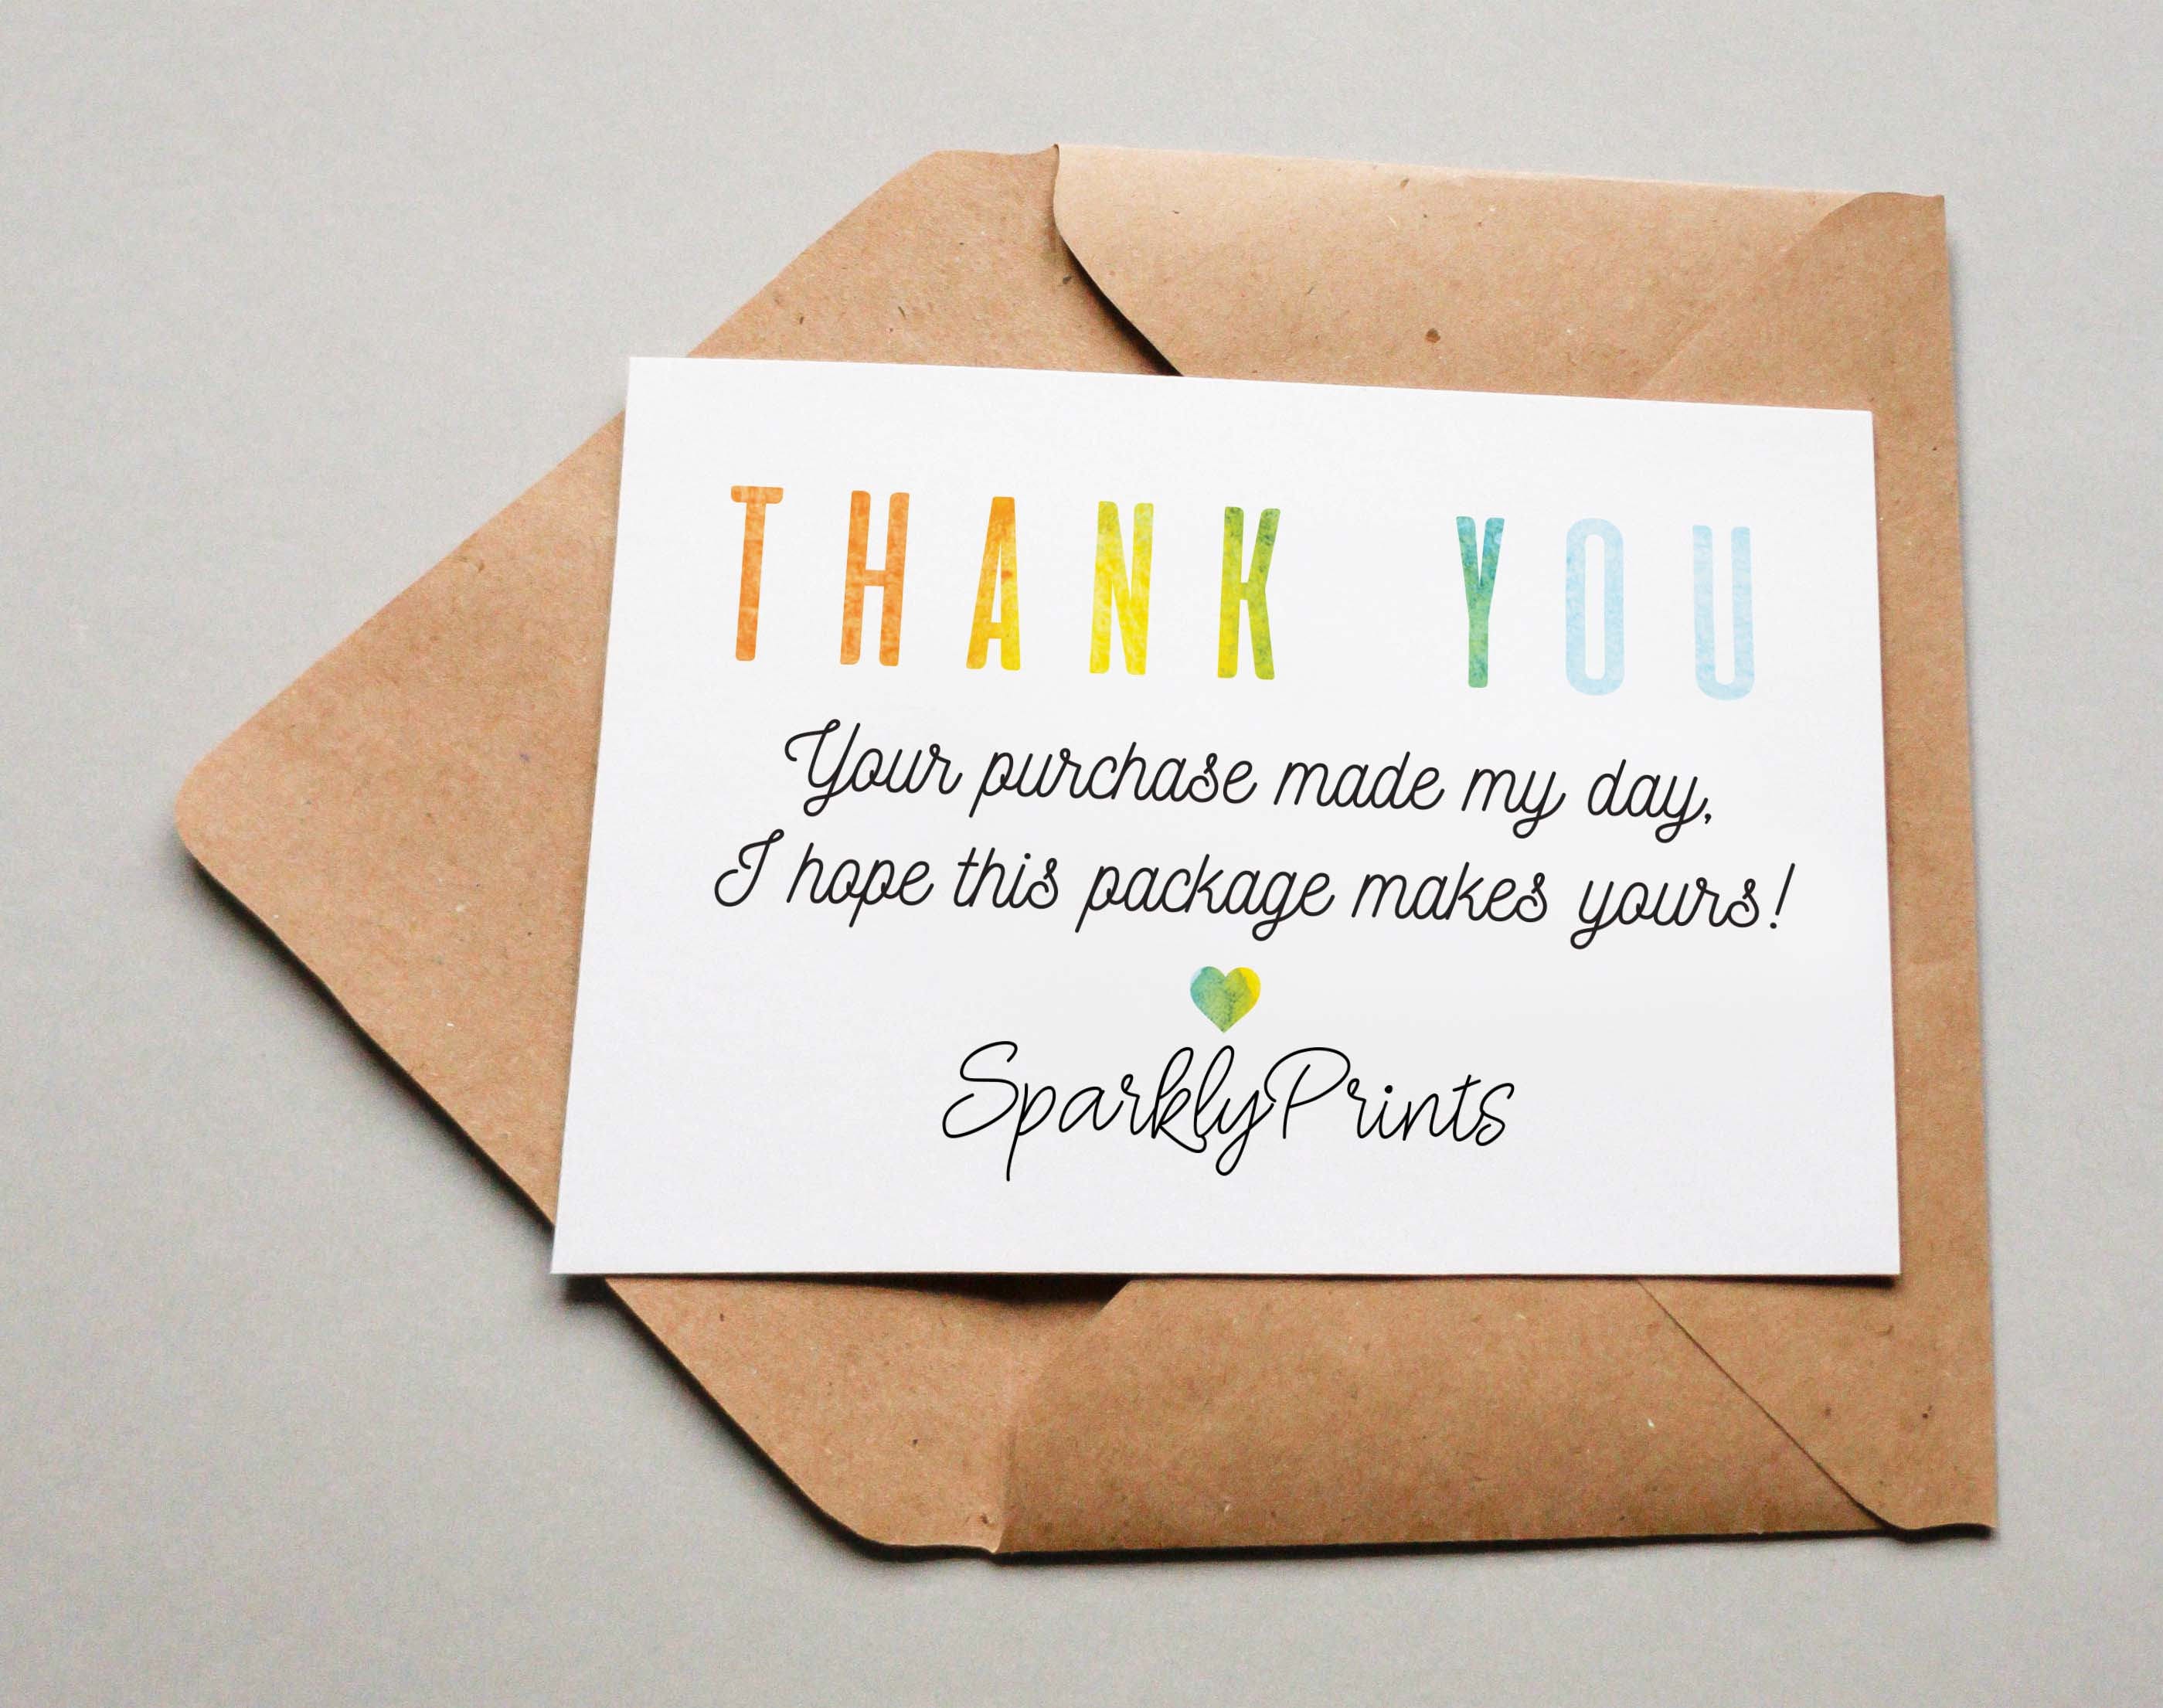 What To Write In A Thank You Card For Small Business